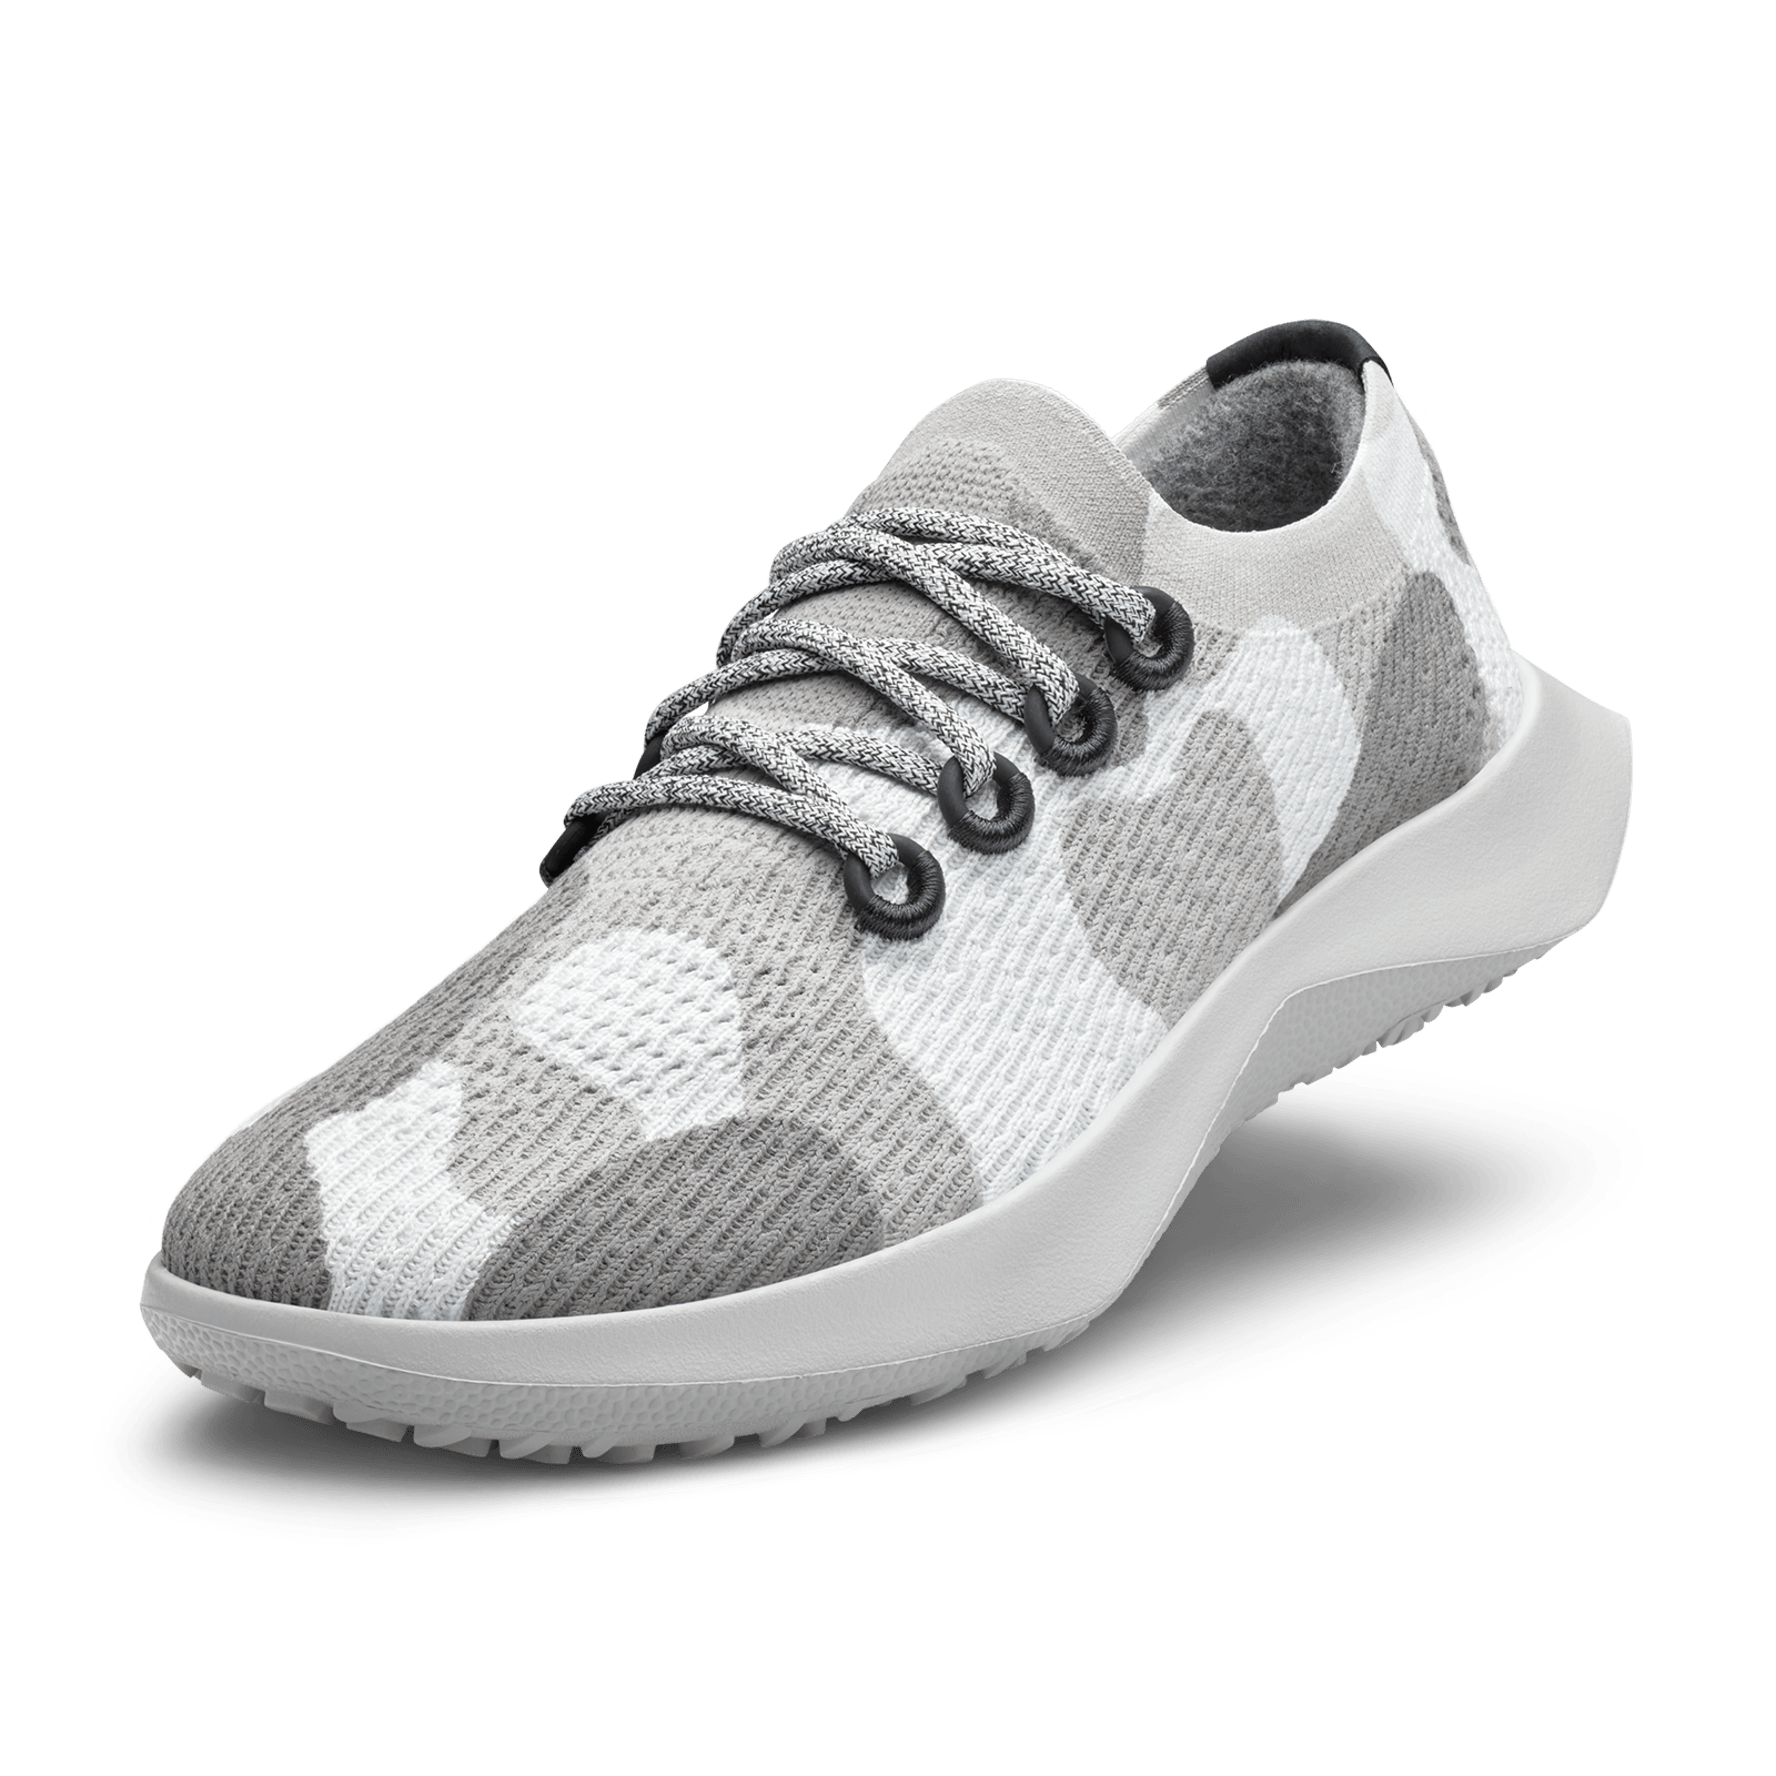 Camouflage Fashion Sneakers For Women And Men Breathable Tiosebon Athletic  Walking Shoes In Army Green, Plus Size 35 44 Perfect For Lovers 2020  Collection L230518 From Sts_013, $17.72 | DHgate.Com